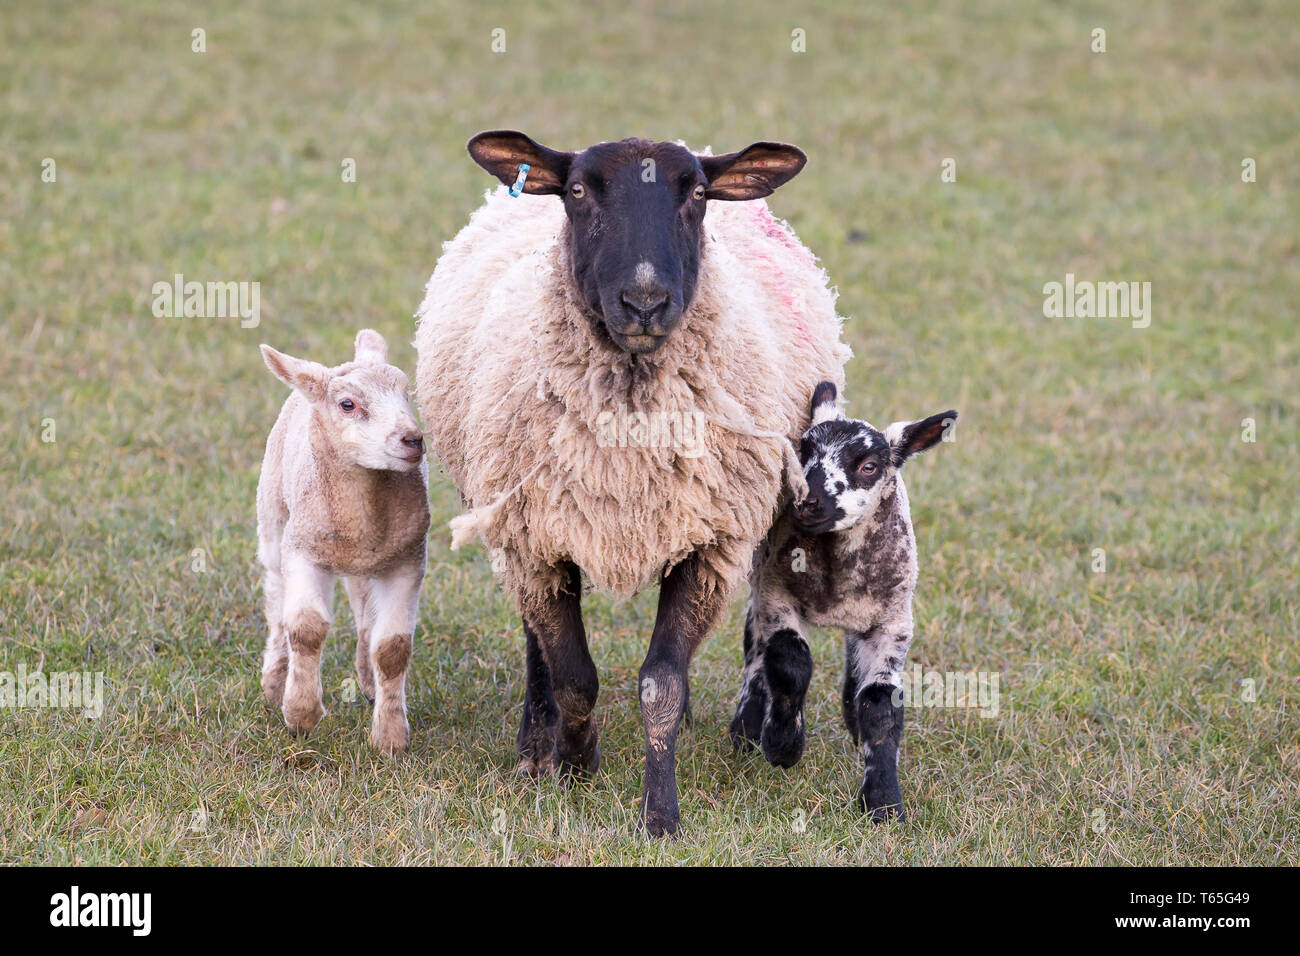 Close, front view of mother sheep with two lambs, one on each side, all animals facing forwards, standing on grass. UK farming in lambing season. Stock Photo